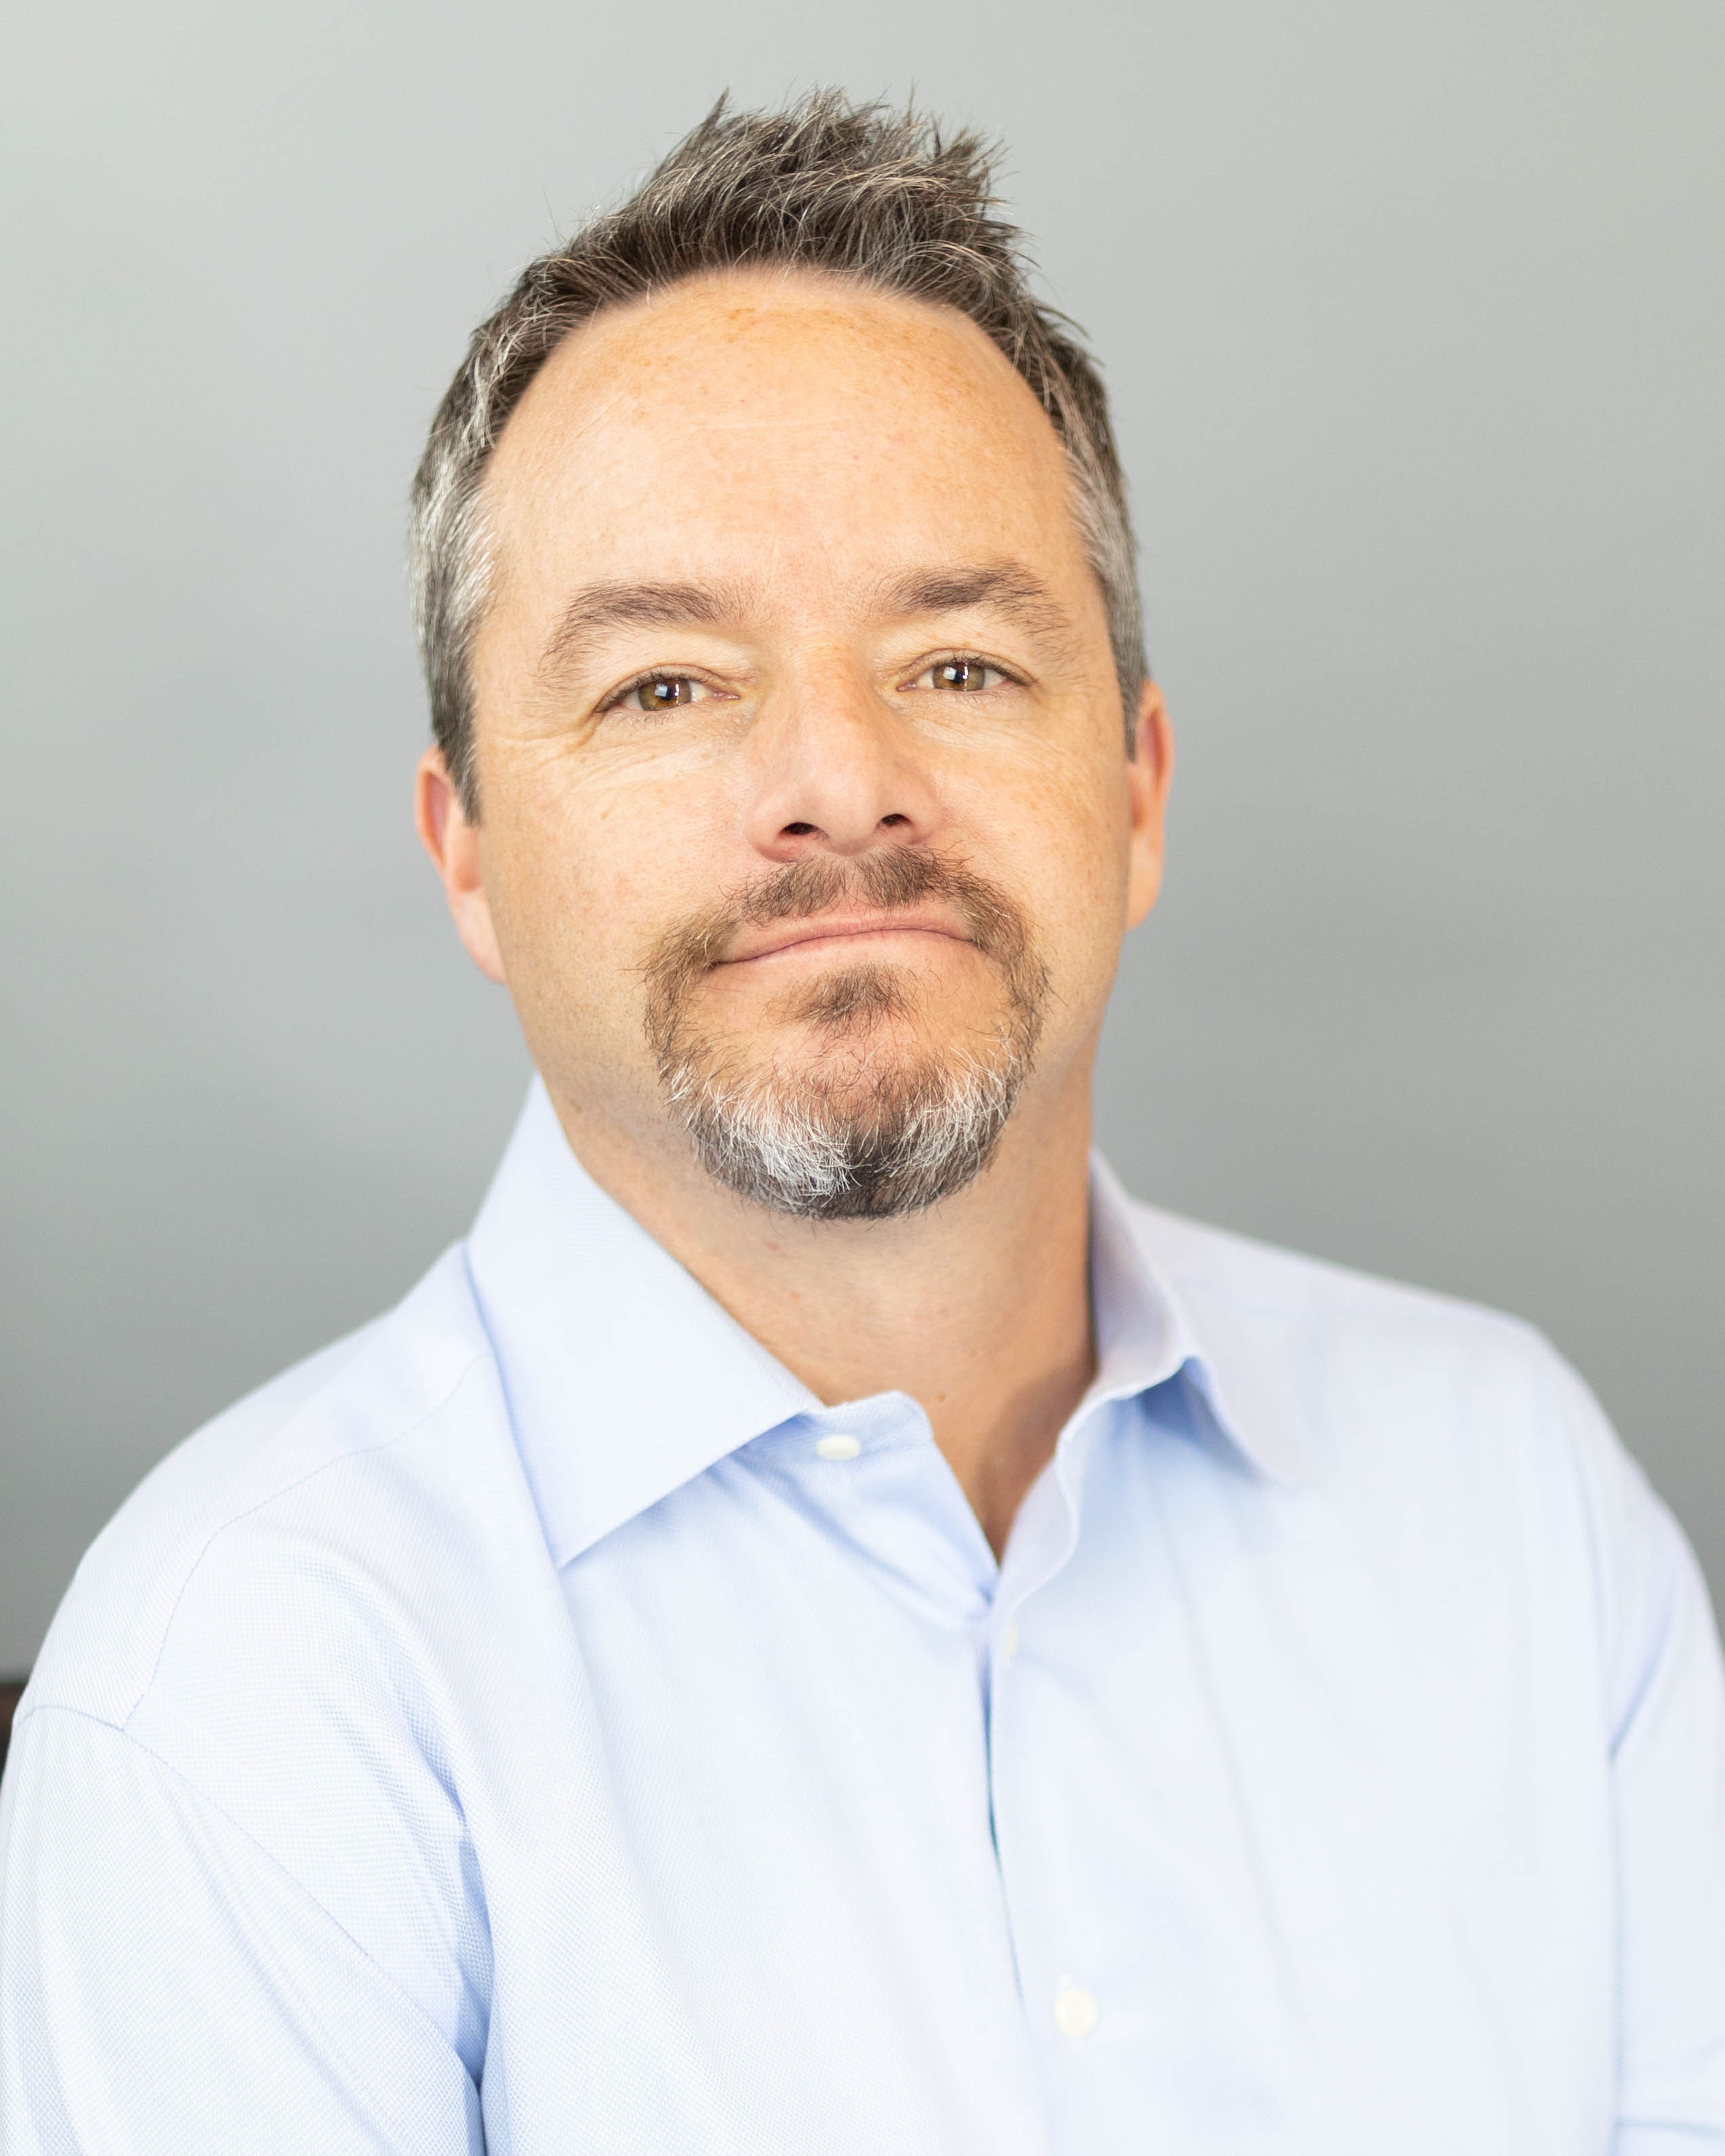 Sagent Lending Technologies has appointed Dan Sogorka to the role of chief executive officer and president